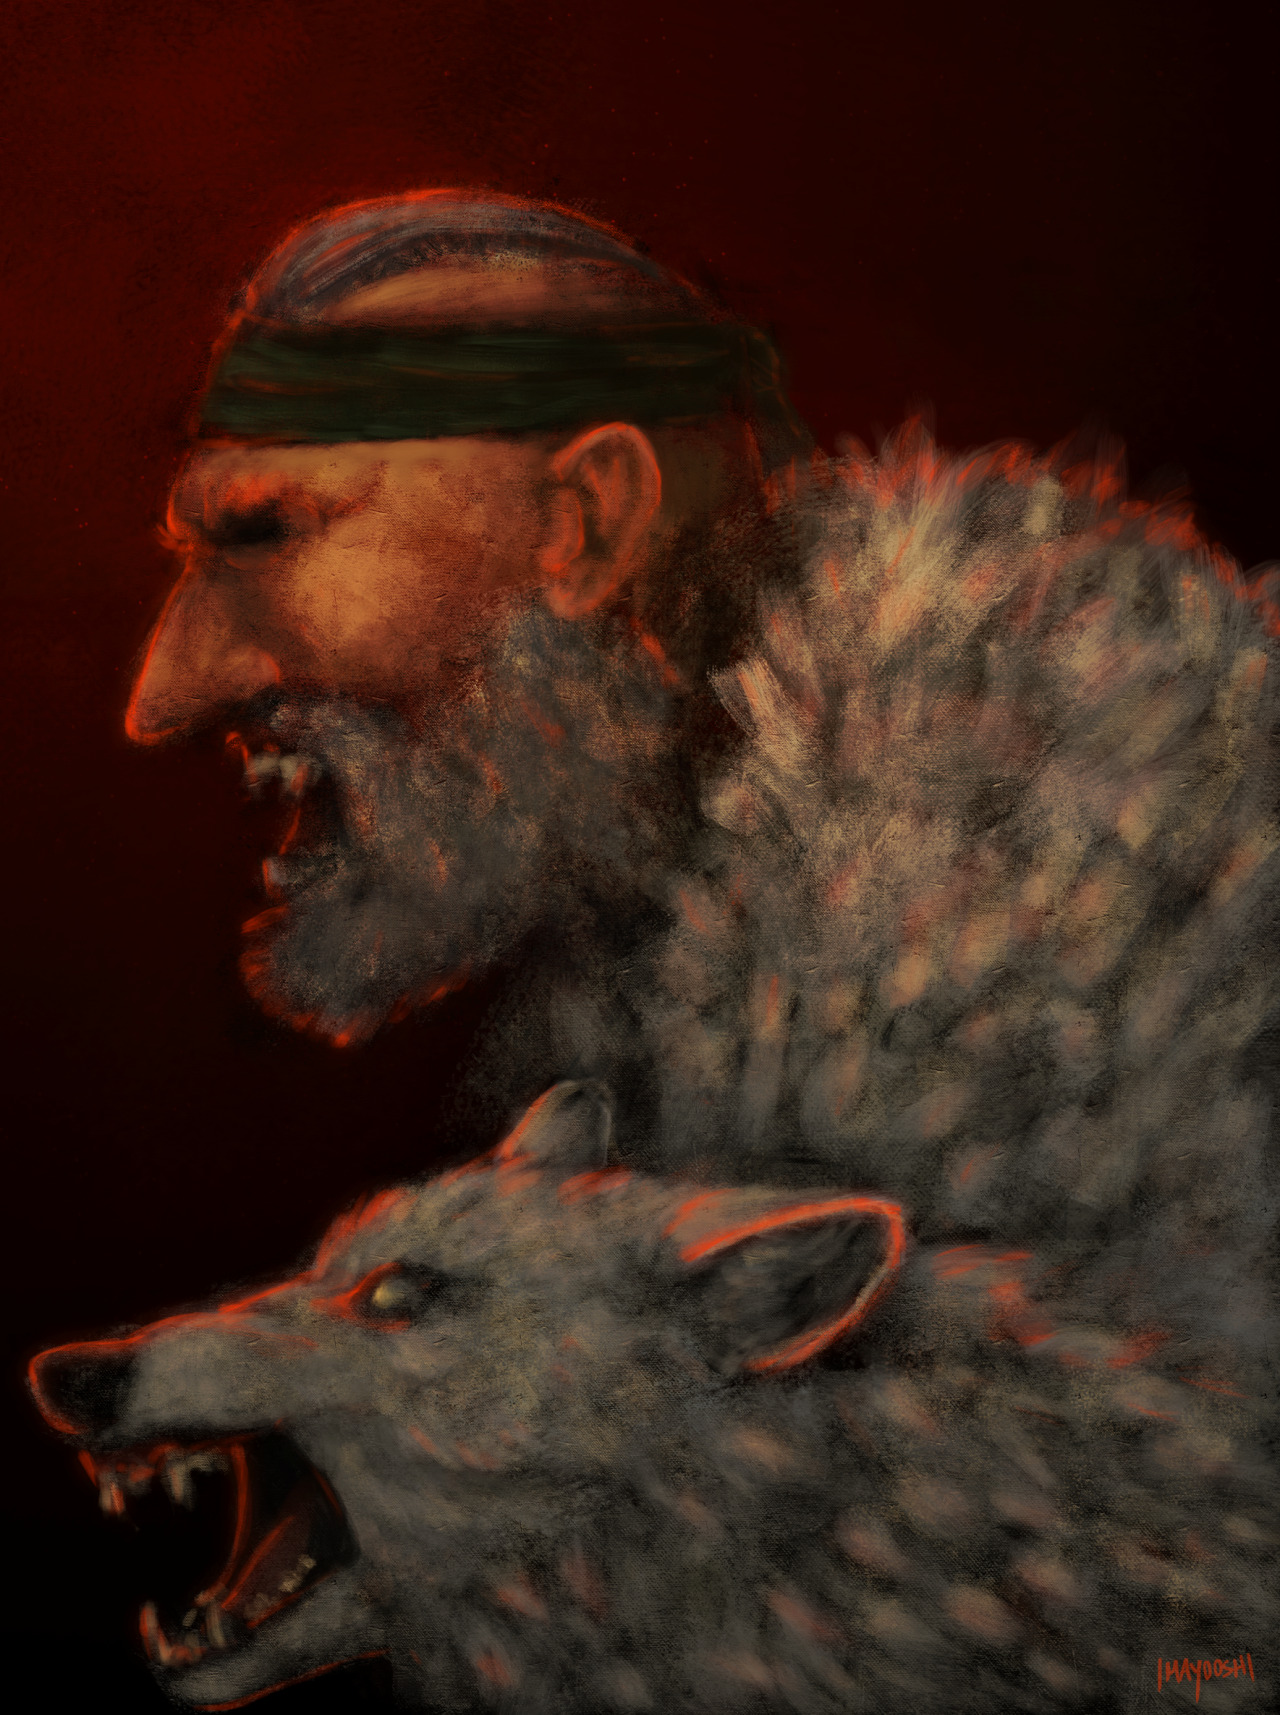 Flames on the horizon, sulfur in the air - the wolves are at the door!  (Painted one of the sketches from this post and devoted all my restless energy on rendering fur) #darkest dungeon#vvulf#dd vvulf#brigand vvulf #I LOVE THIS MAN SO MUCH  #SO SO MUCH  #I WILL SINGLEHANDEDLY POPULATE THE VVULF TAG #my art